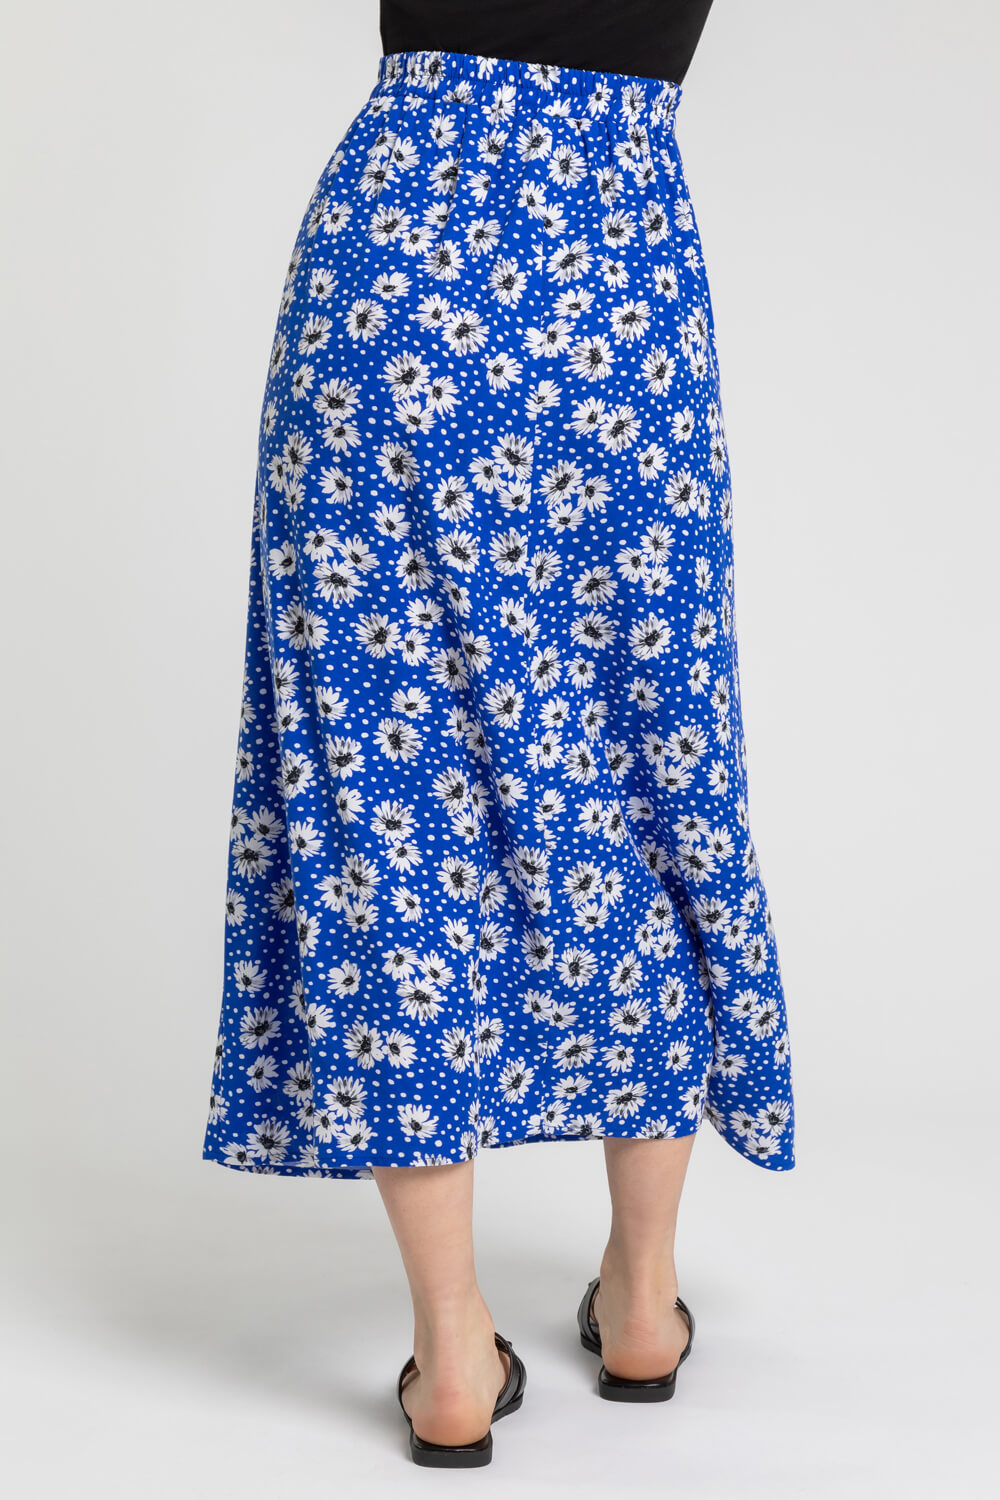 Blue Petite Floral Print A-Line Skirt, Image 2 of 4